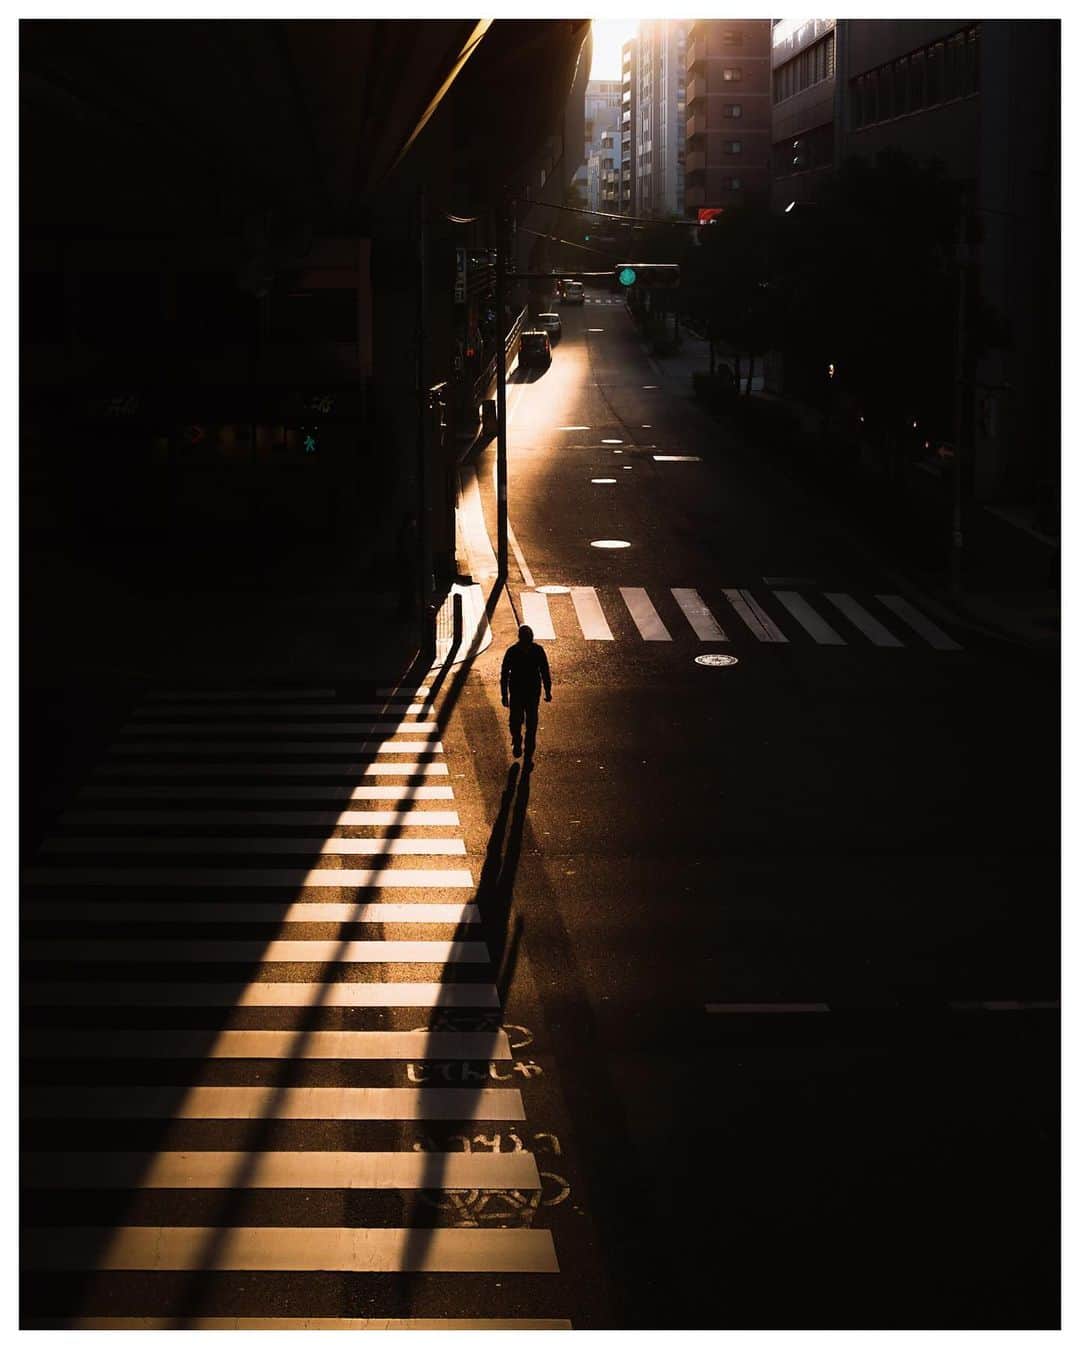 Takashi Yasuiのインスタグラム：「Tokyo 🚶‍♀️ February 2022  📕My photo book - worldwide shipping daily - 🖥 Lightroom presets ▶▶Link in bio  #USETSU #USETSUpresets #TakashiYasui #SPiCollective #filmic_streets #ASPfeatures #photocinematica #STREETGRAMMERS #street_storytelling #bcncollective #ifyouleave #sublimestreet #streetfinder #timeless_streets #MadeWithLightroom #worldviewmag #hellofrom #reco_ig」